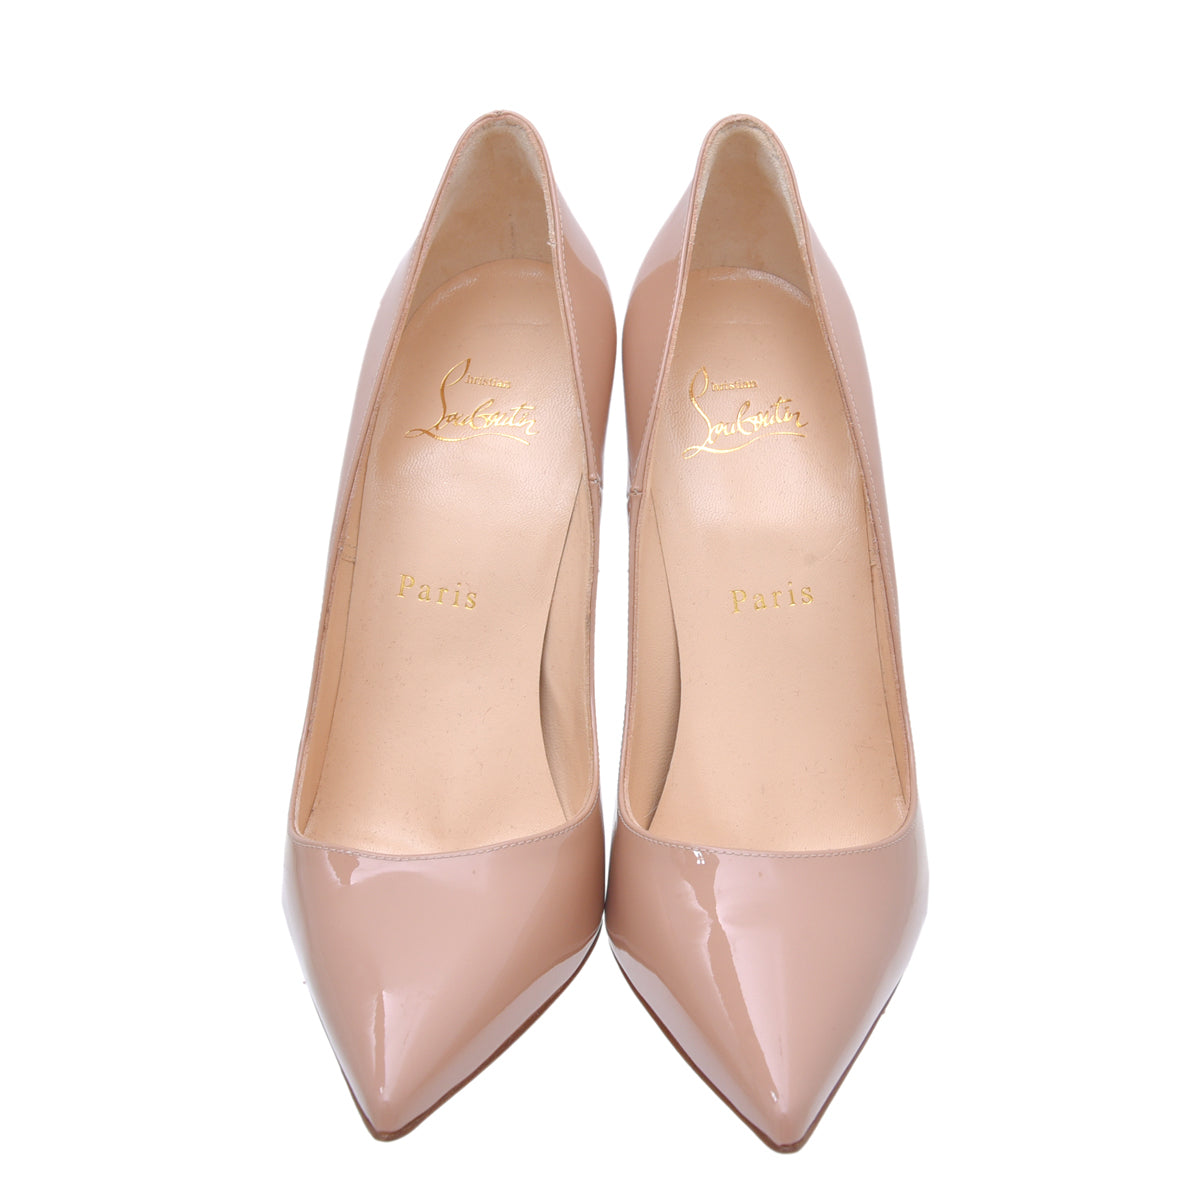 Christian Louboutin Nude Patent So Kate Pumps 38